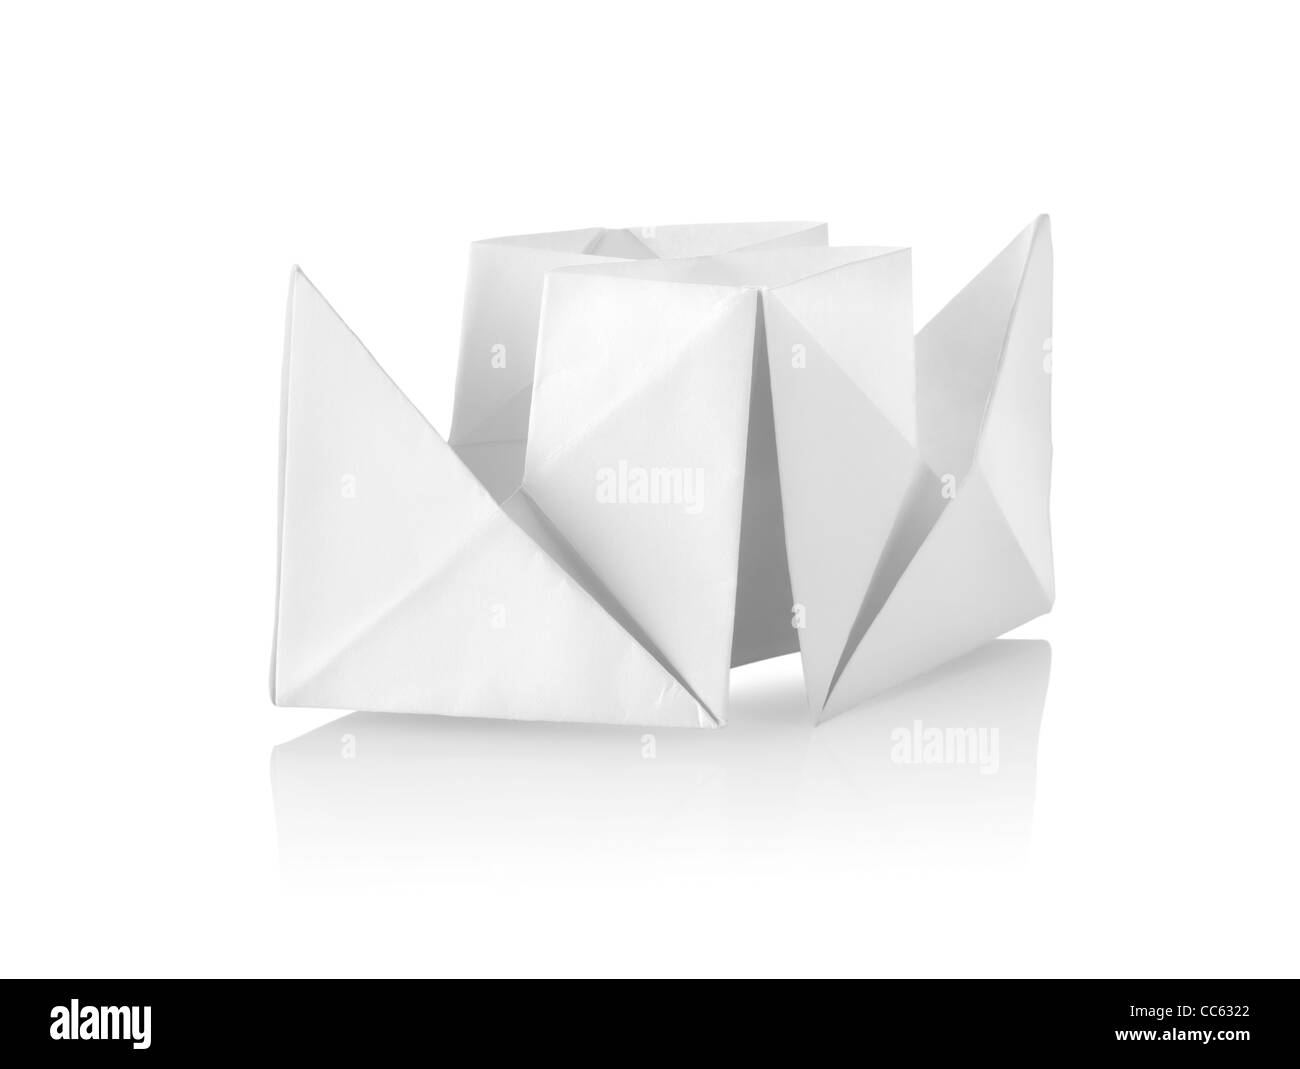 Paper boat isolated on a white background Stock Photo